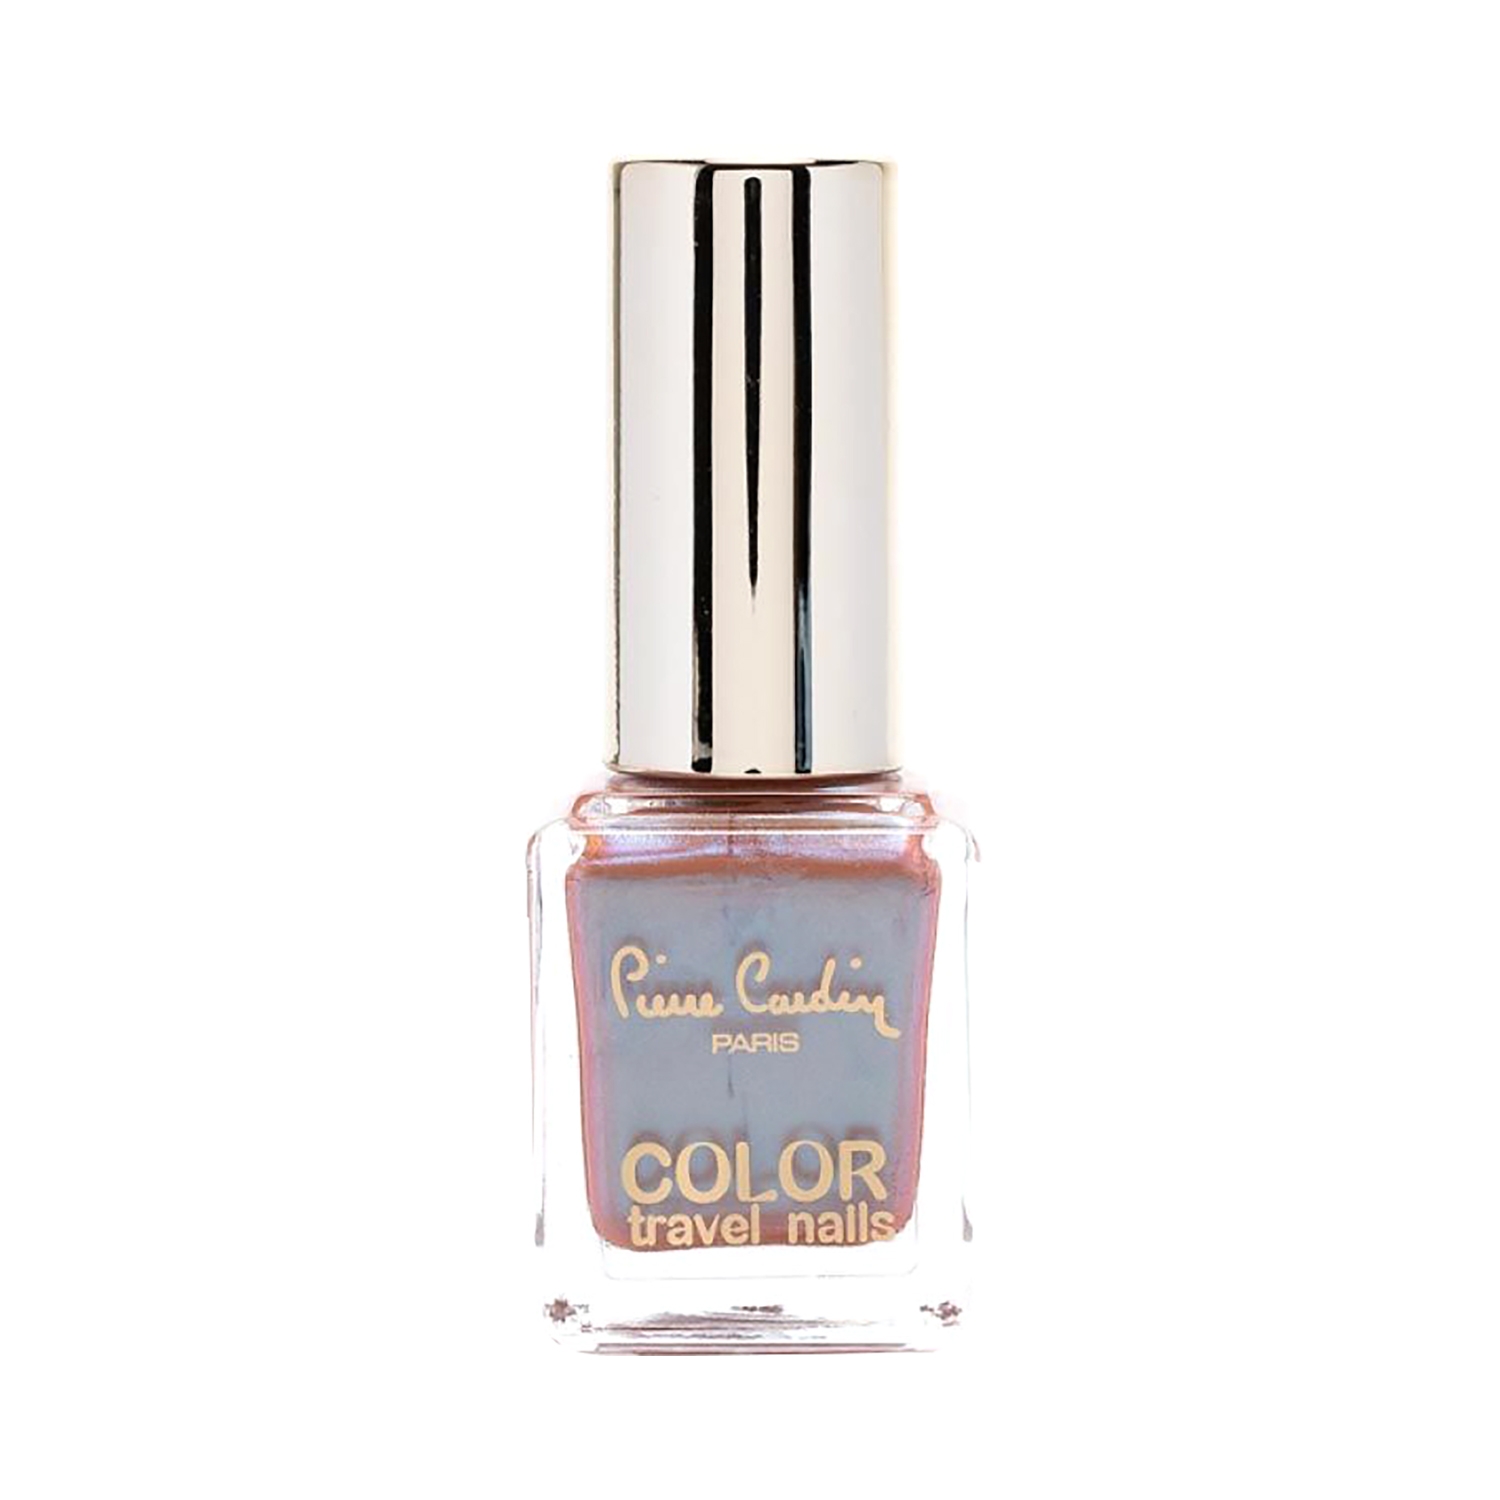 Pierre Cardin Paris Color Travel Nails - 95-Pearly Salmon To Blue (11.5ml)